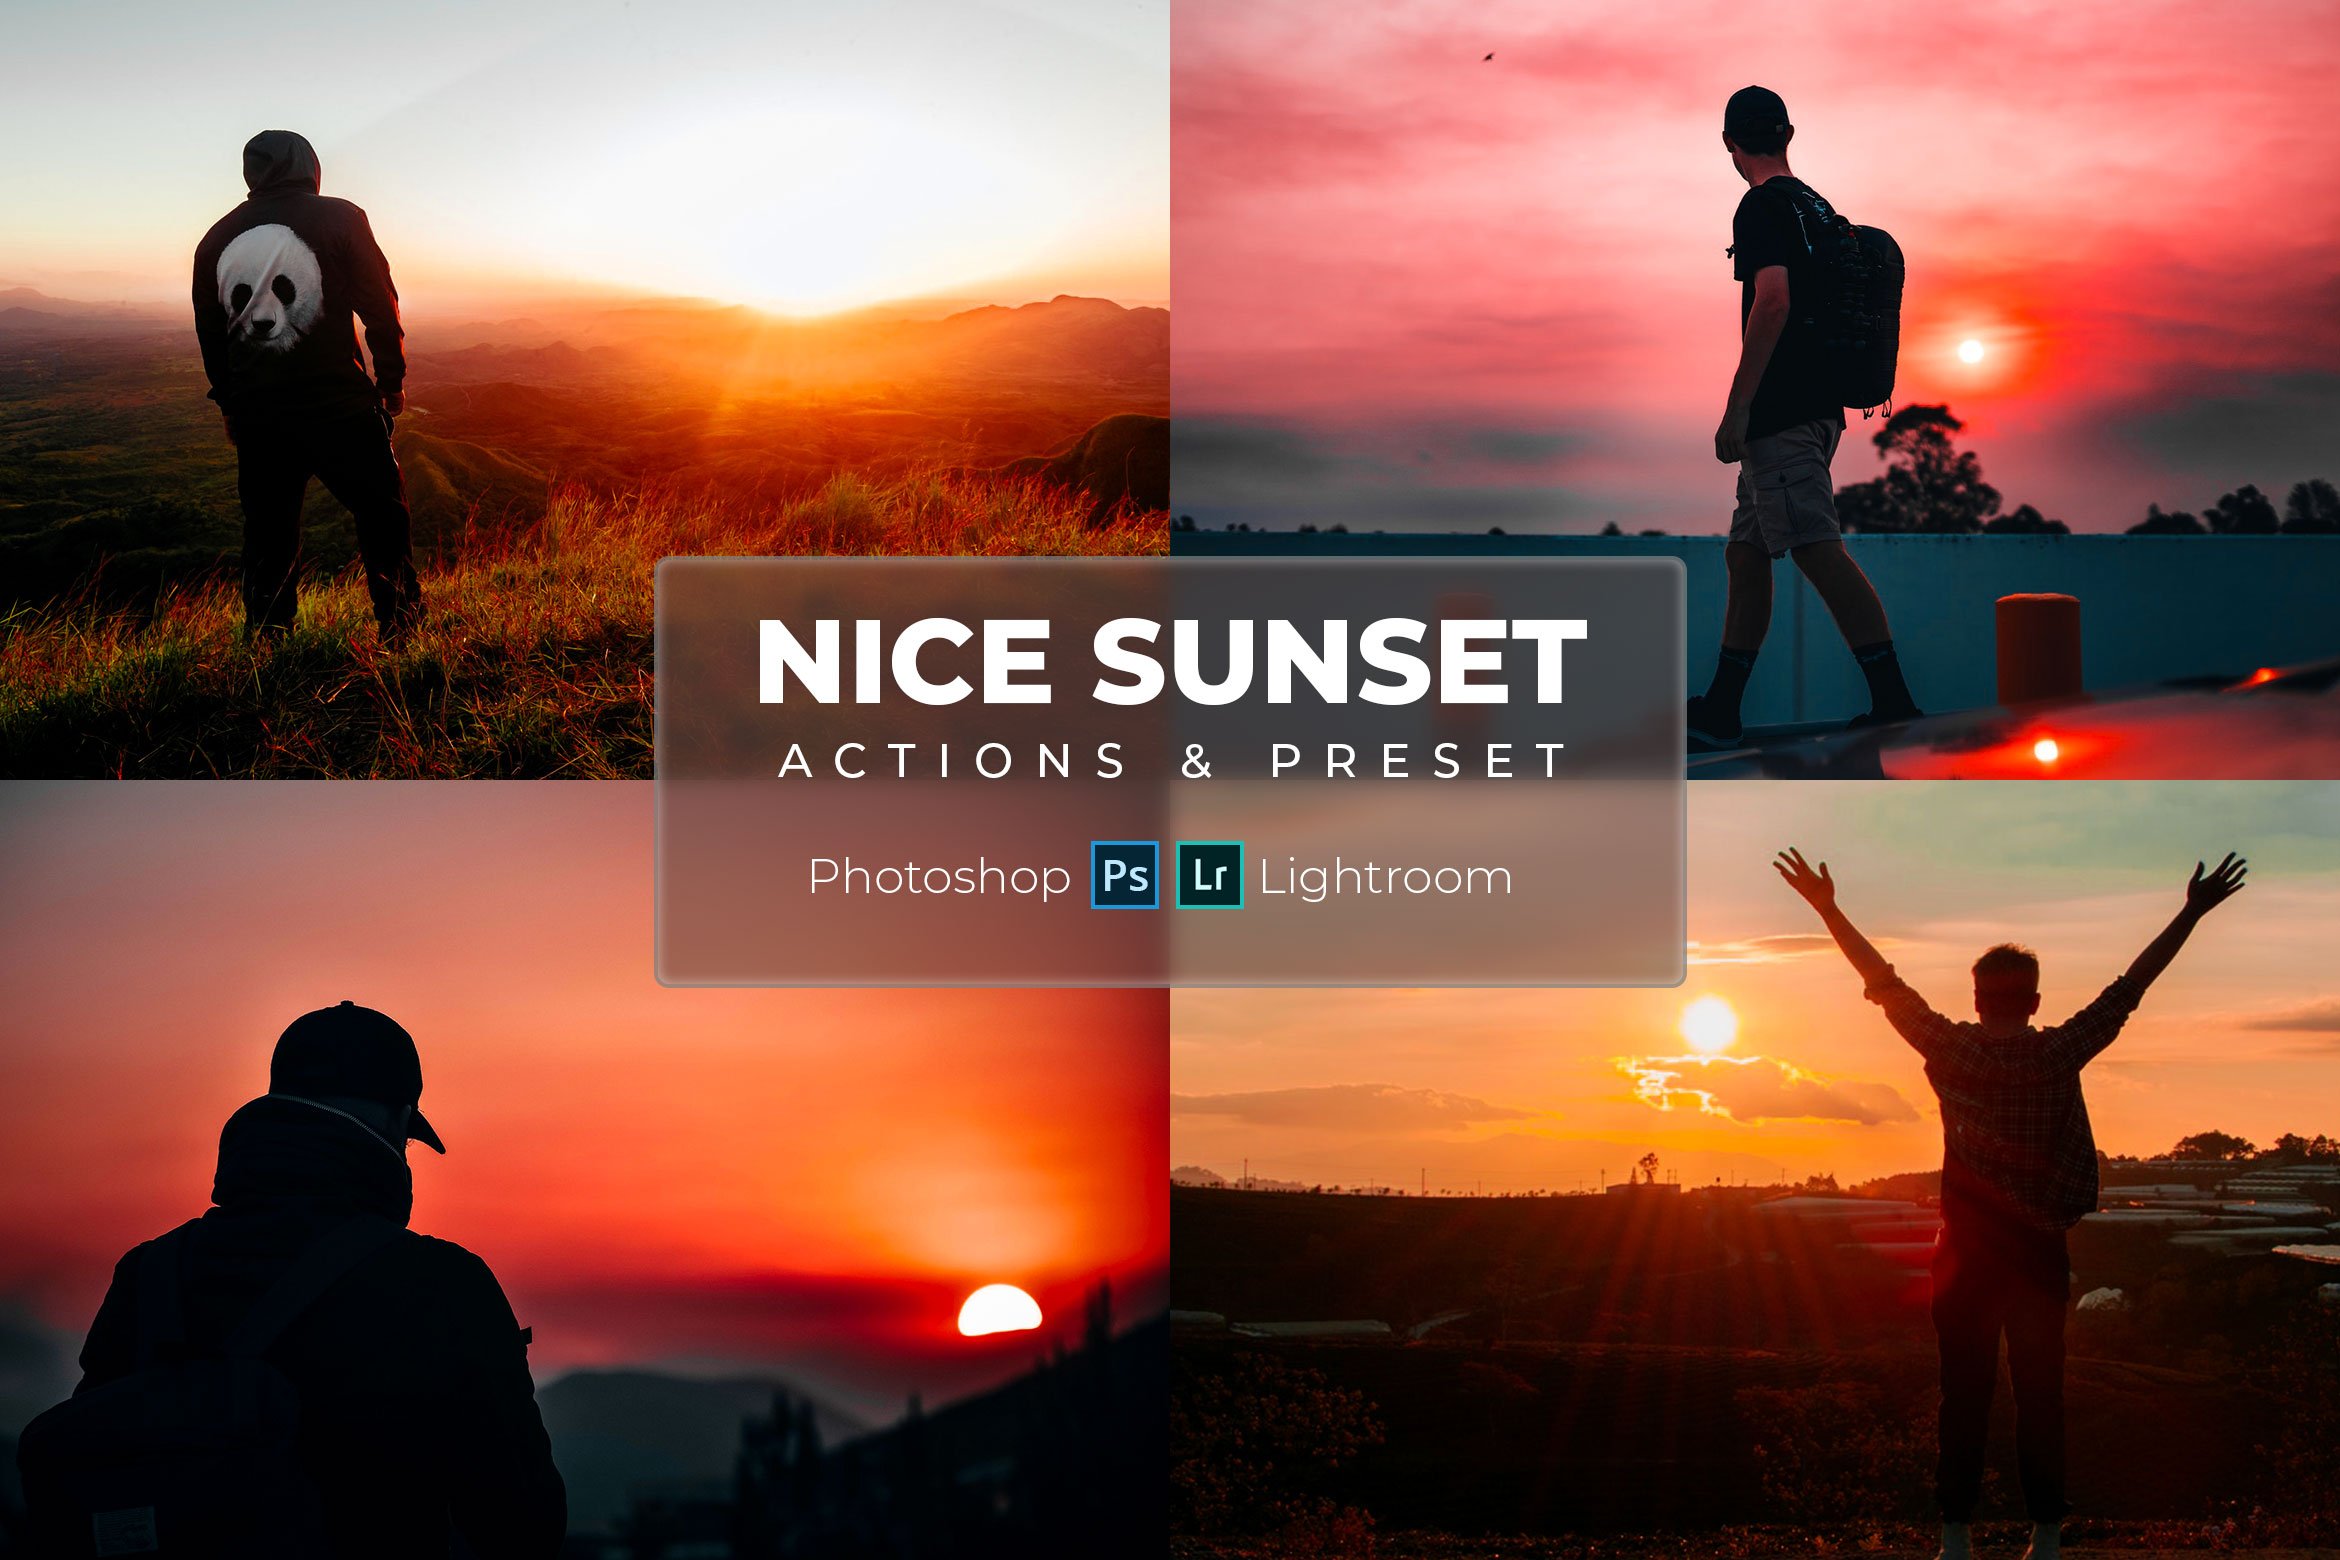 Nice Sunset (Actions & Presets)cover image.